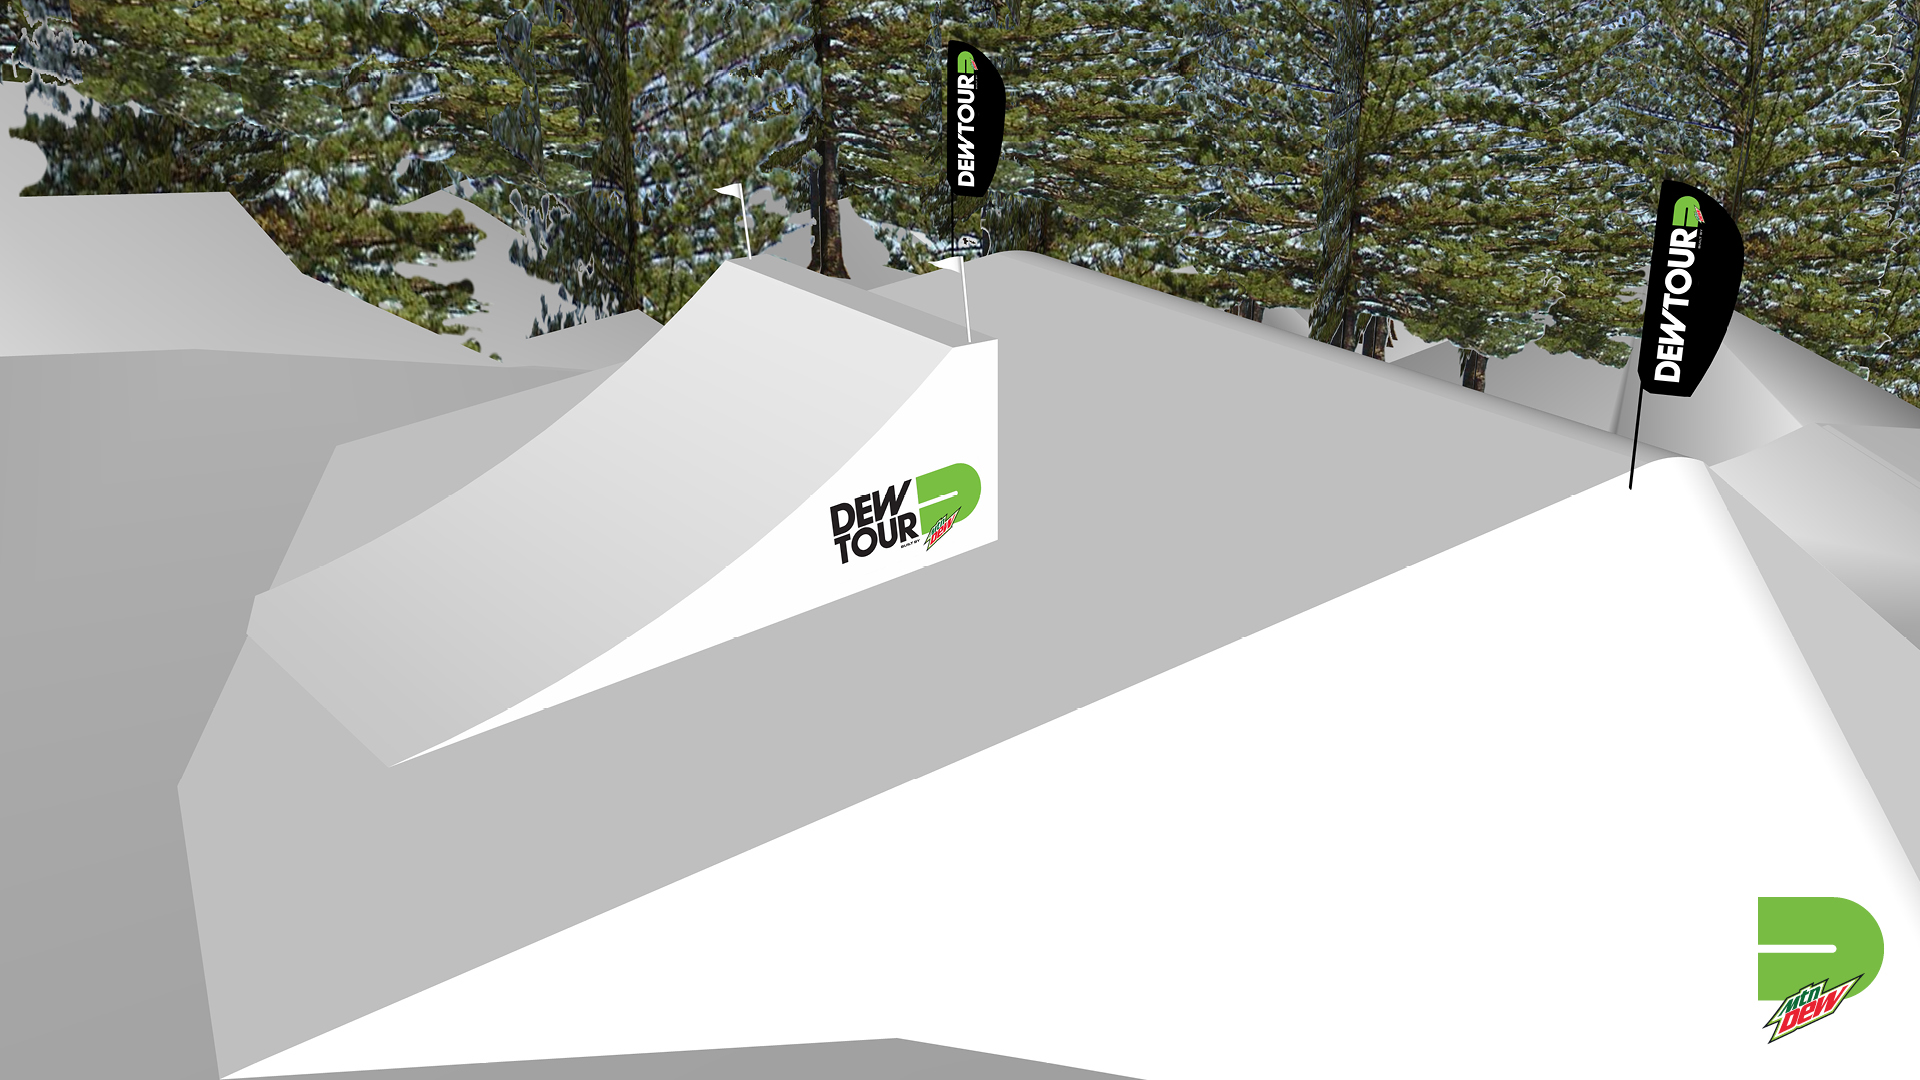 Dt BRECK 18 COURSE FEATURES SLOPE 7